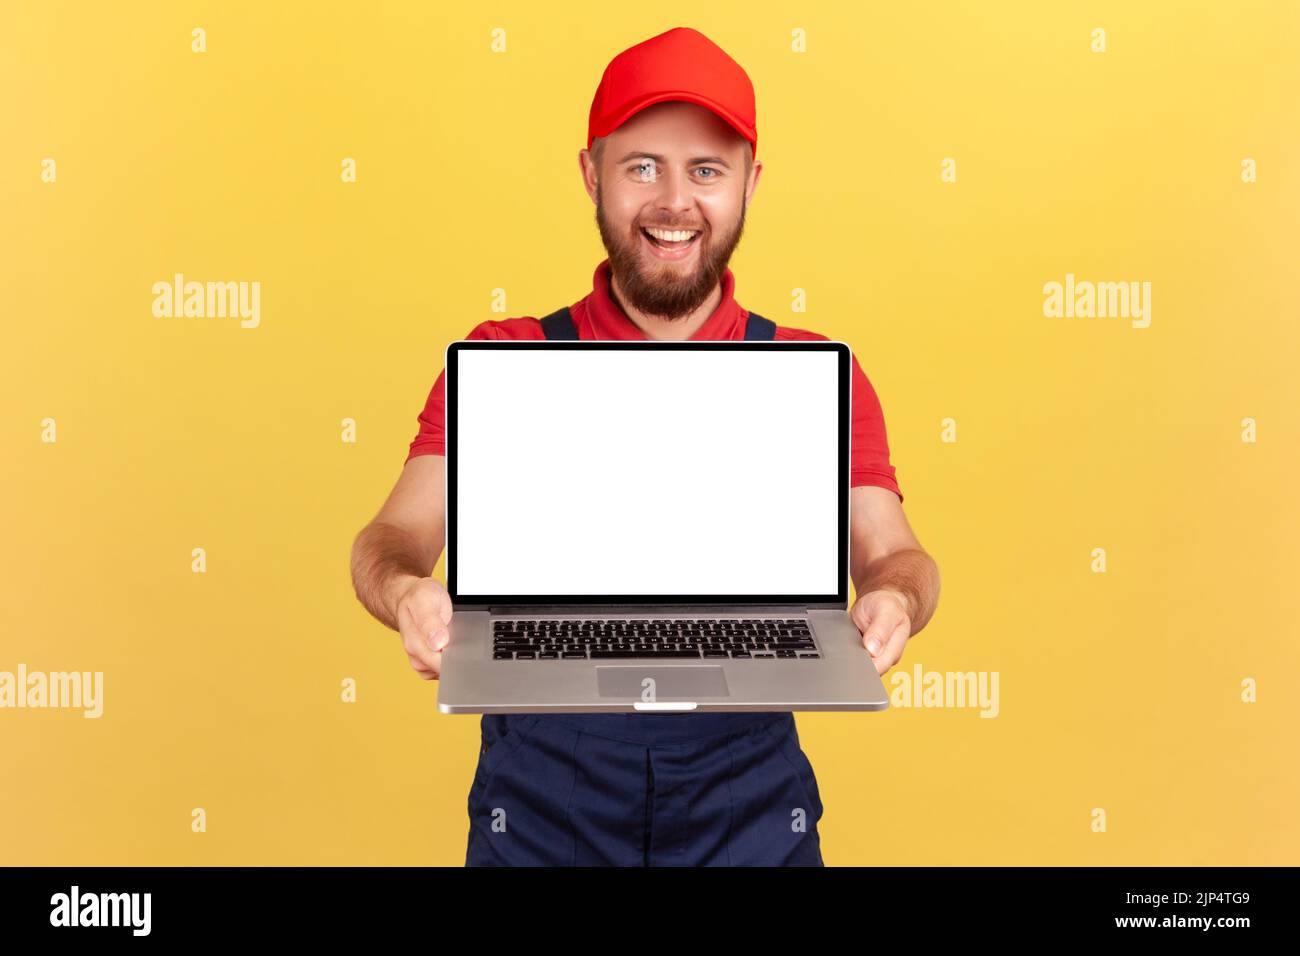 Portrait of delighted handsome worker man in red cap holding laptop, showing blank screen with copy space for advertisement and promotional text. Indoor studio shot isolated on yellow background. Stock Photo